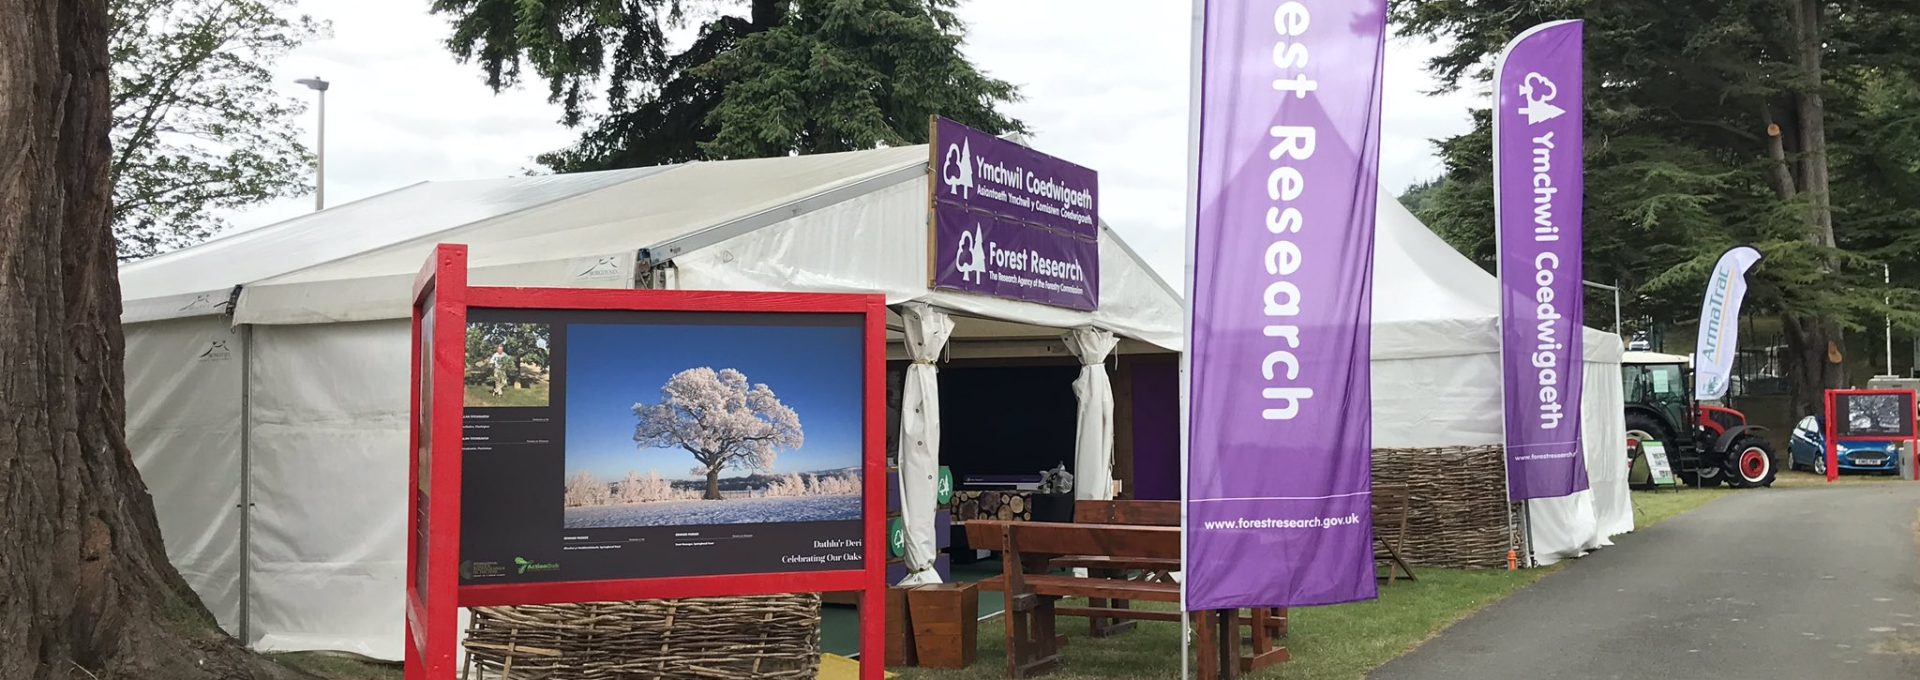 FR's stand at the 2019 Royal Welsh Show